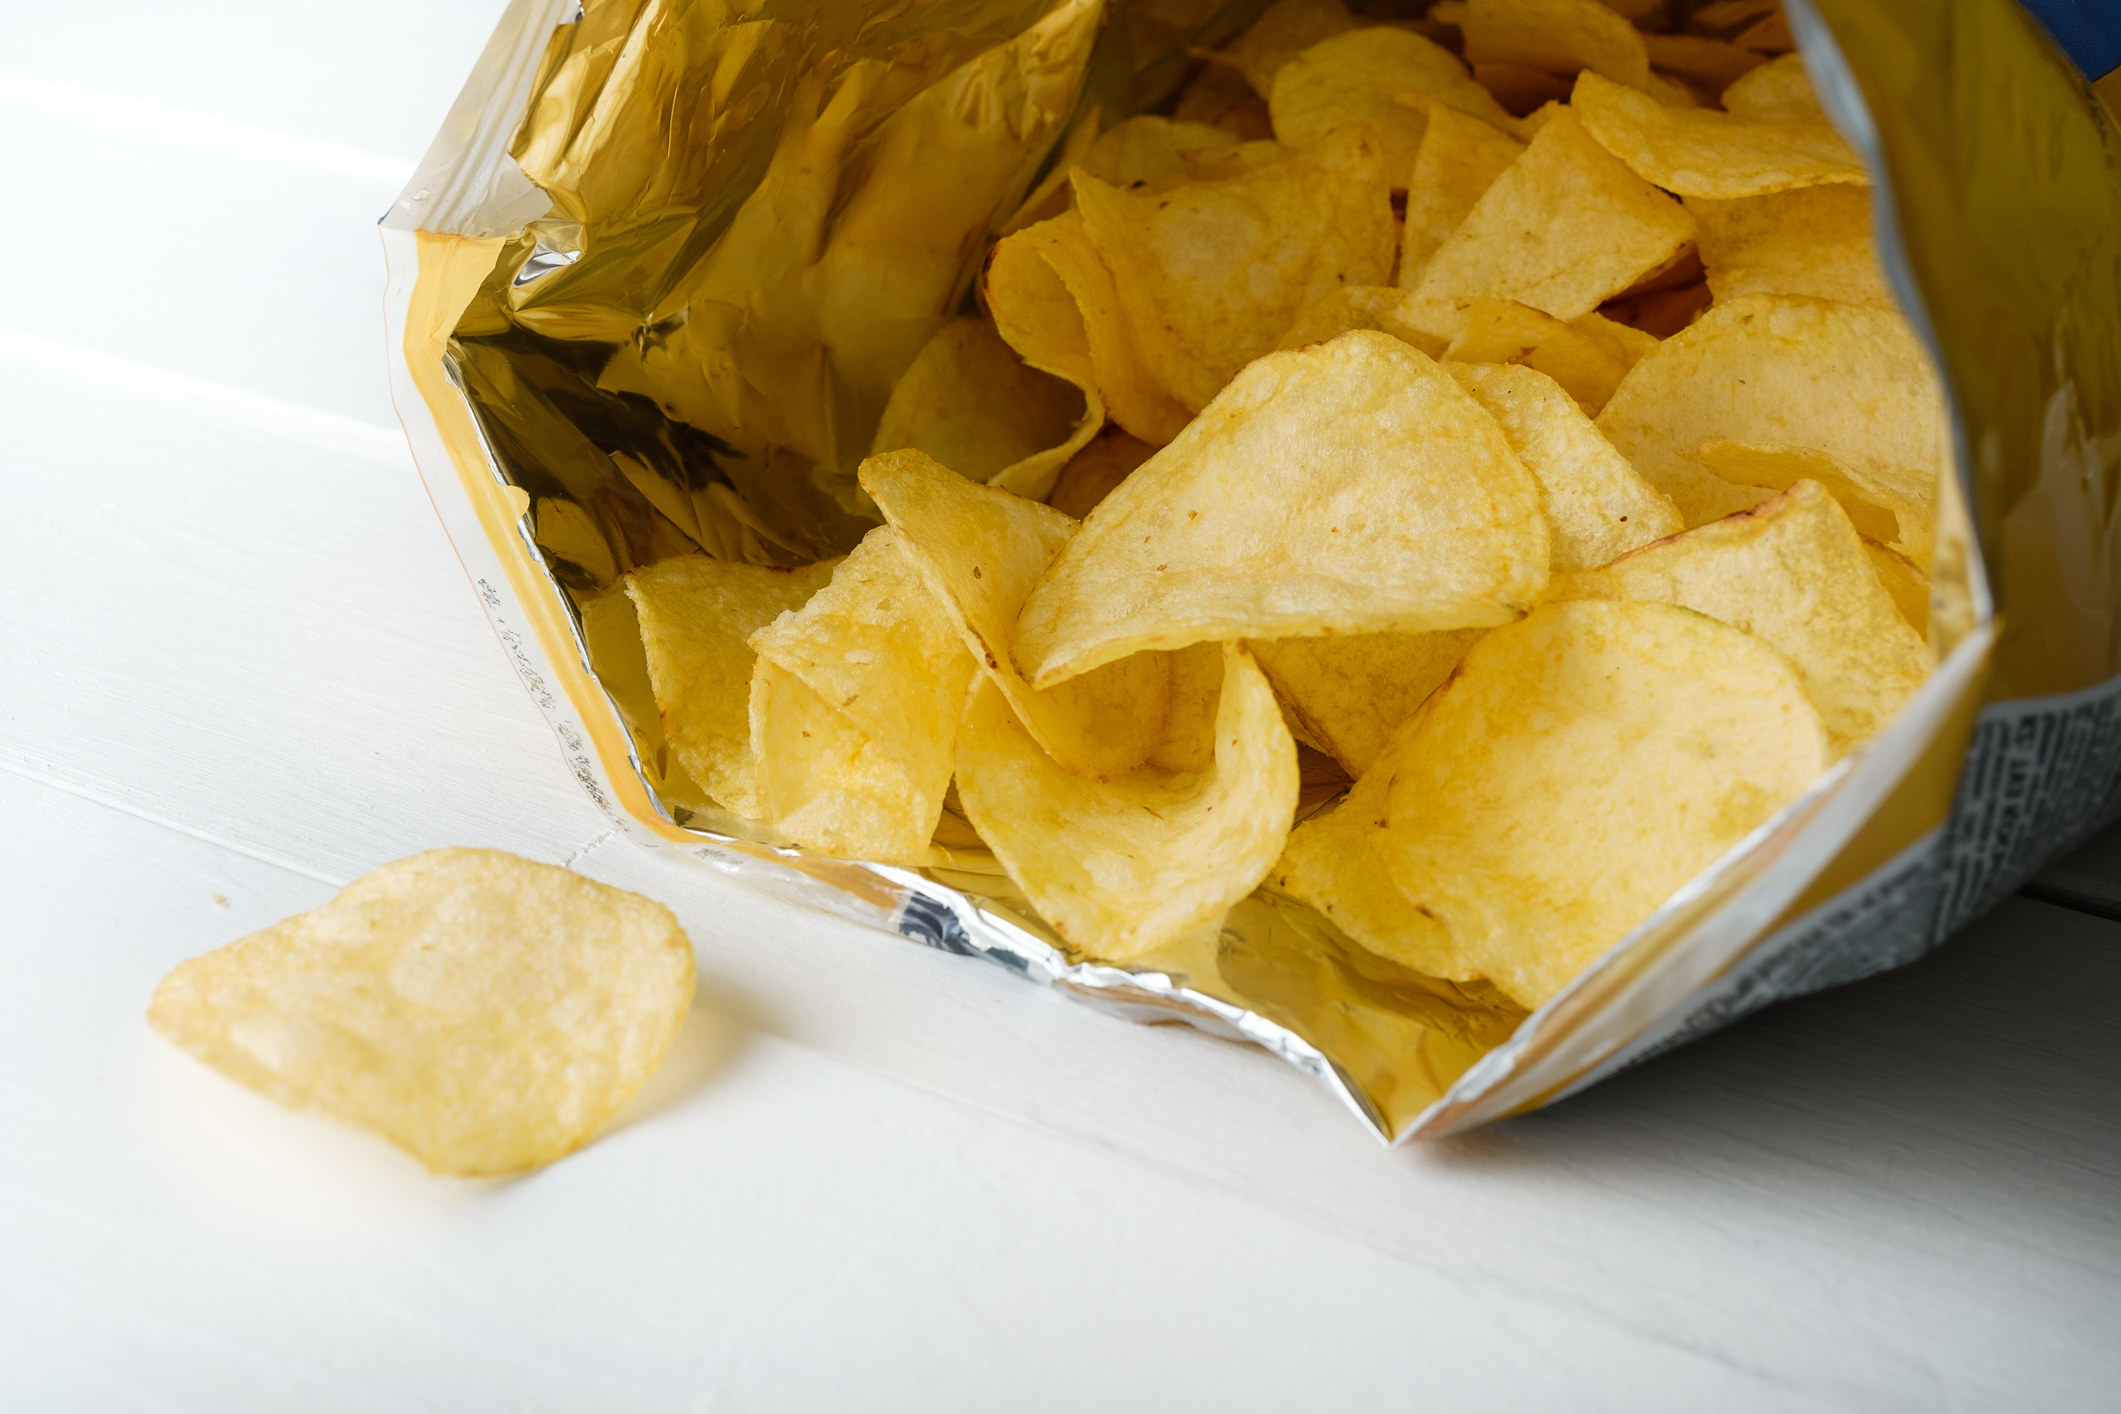 An opened bag of potato chips